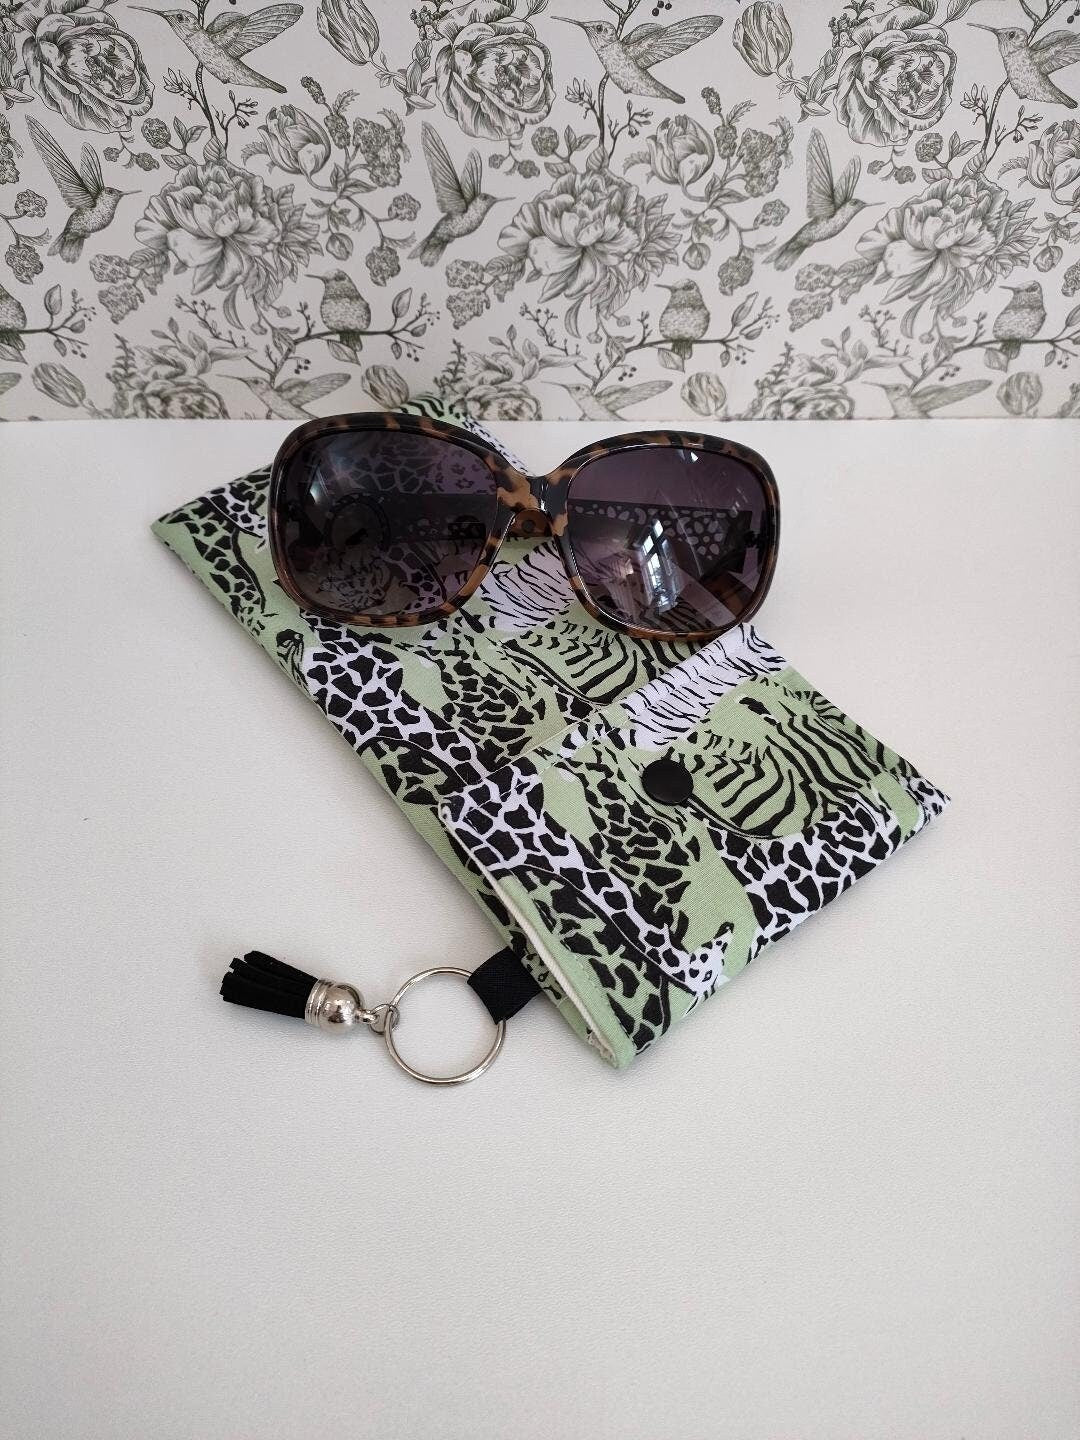 Safari Print Print Themed Soft Glasses Case, Holiday Accessories Essentials, Sun Glasses Padded Sleeve, Spectacles Case, Zebra Glasses Case